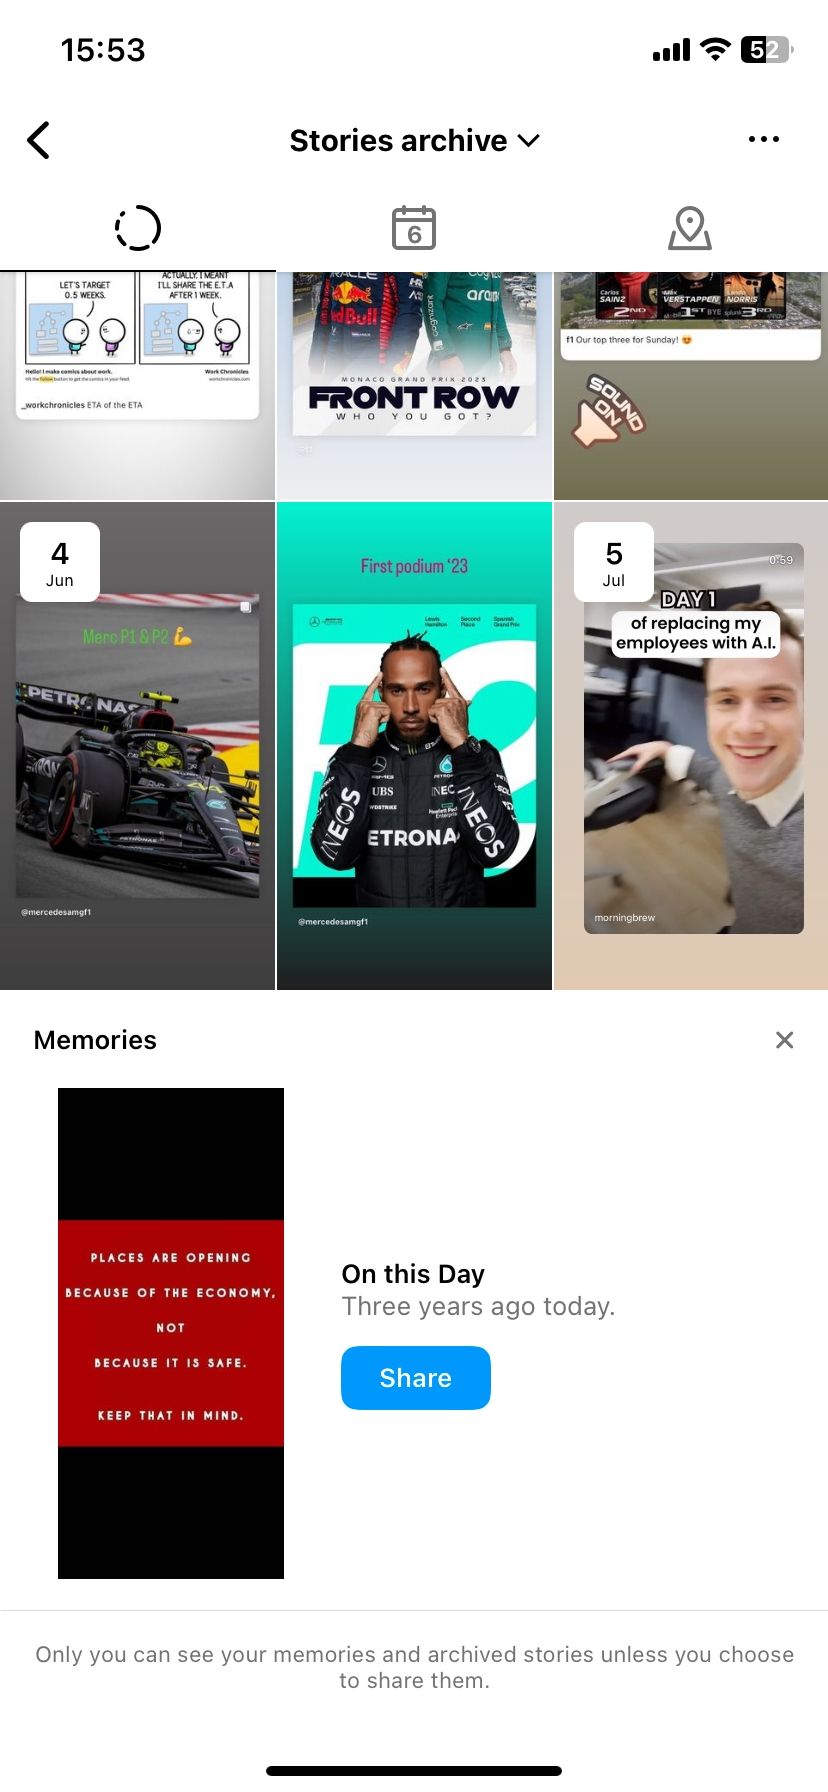 Viewing stories archive on Instagram's mobile app